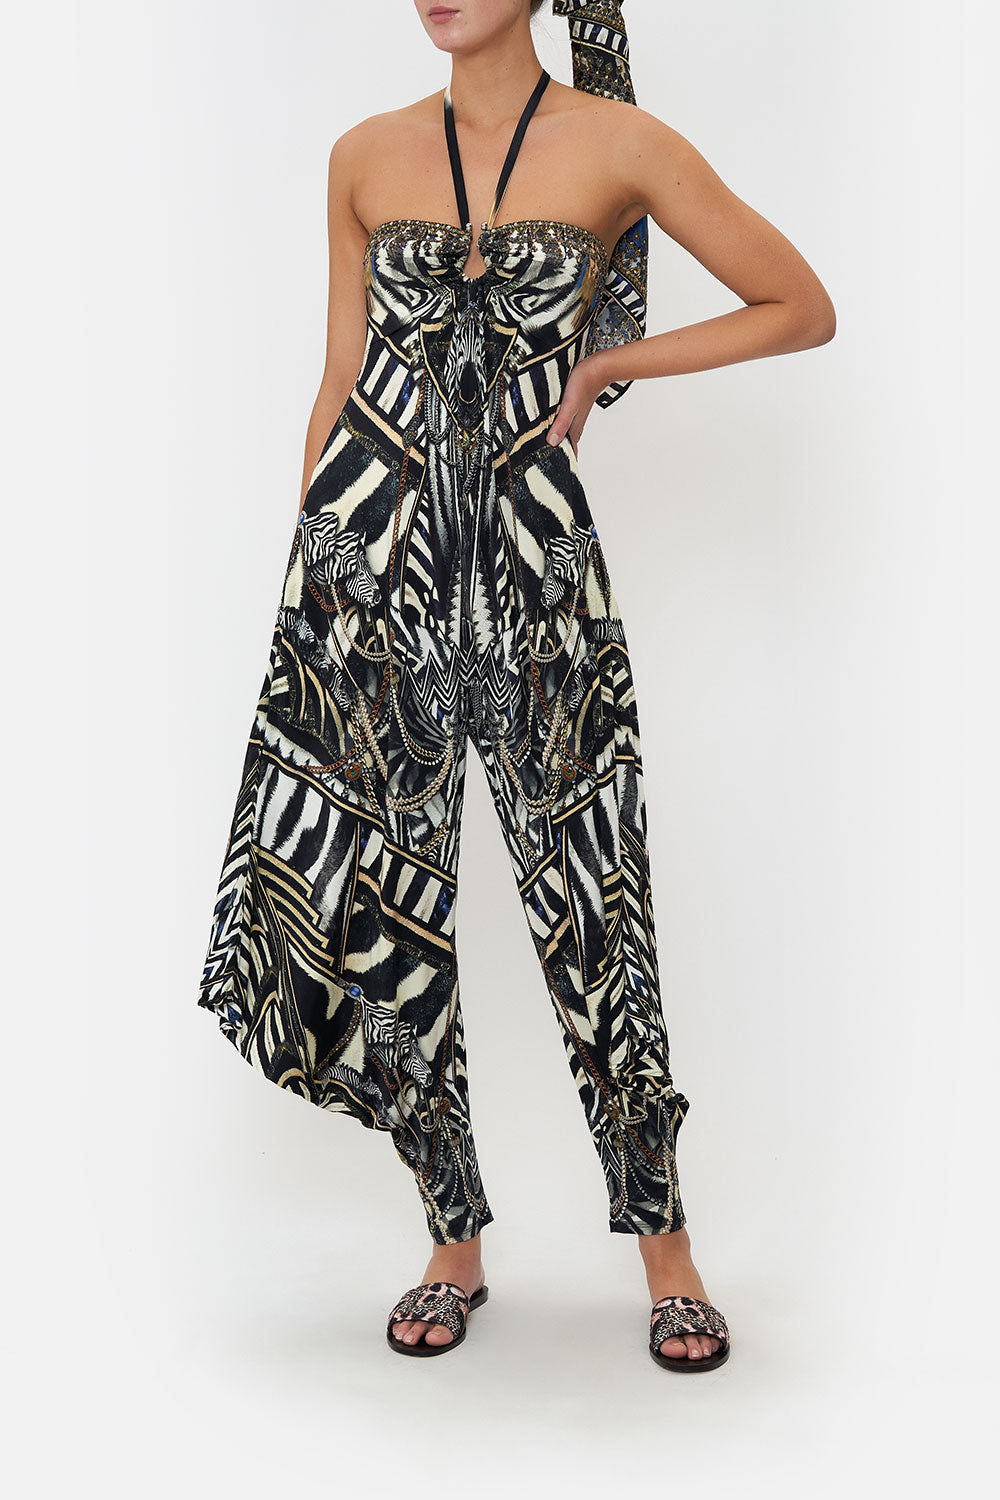 DRAPED PANT JUMPSUIT WITH HARDWARE KNIGHT OF THE WILD